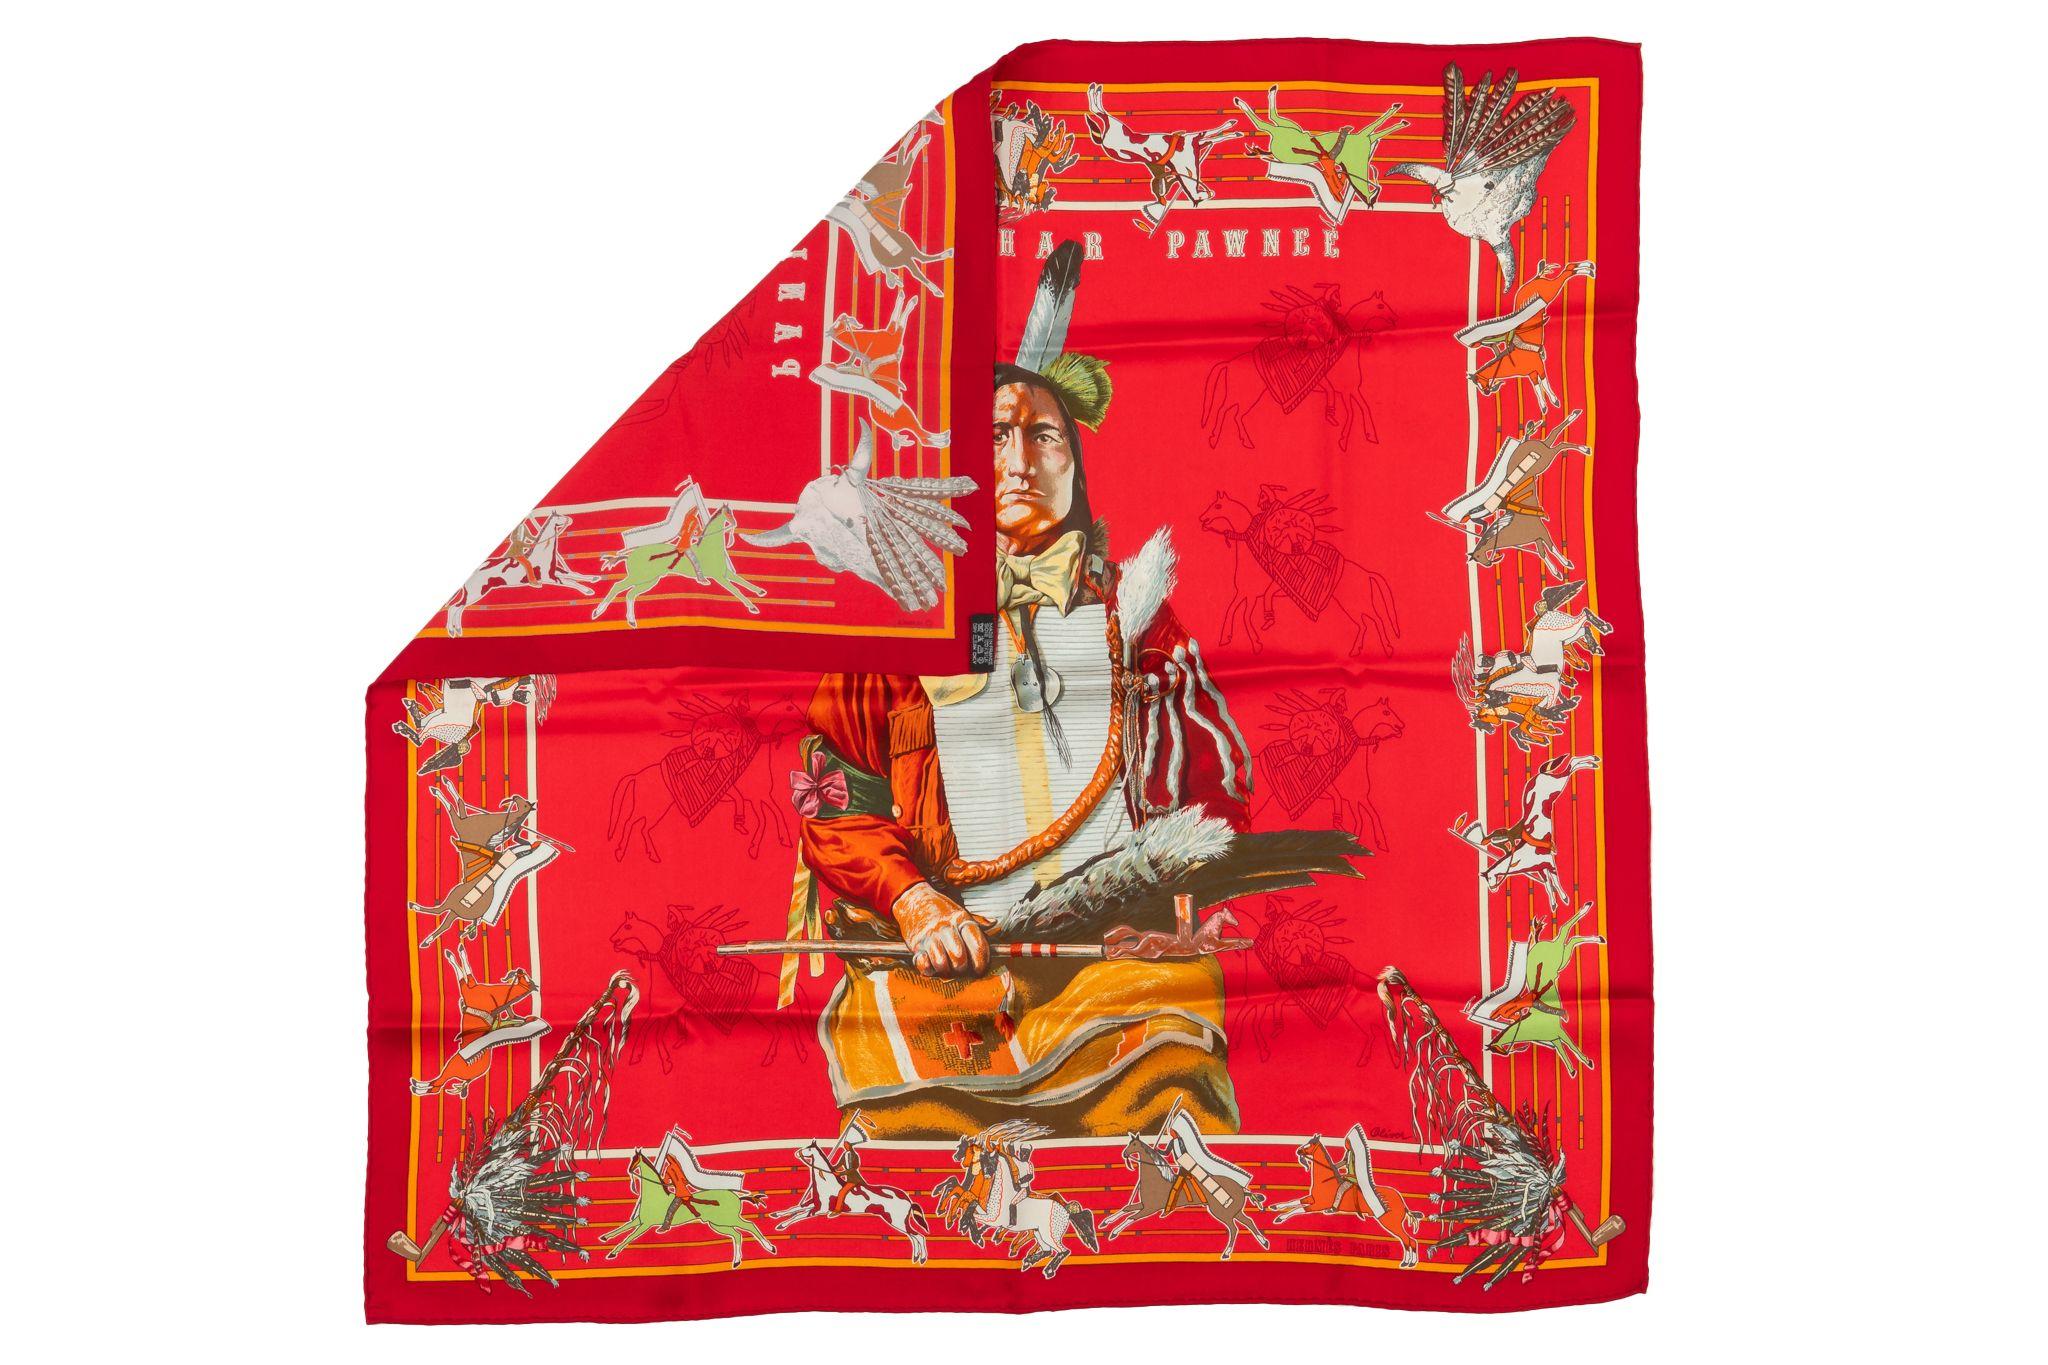 Hermes Pani La Shar Pawnee 100% Silk Scarf by Kermit Oliver Grail. Features hand rolled hem. Comes with no box.